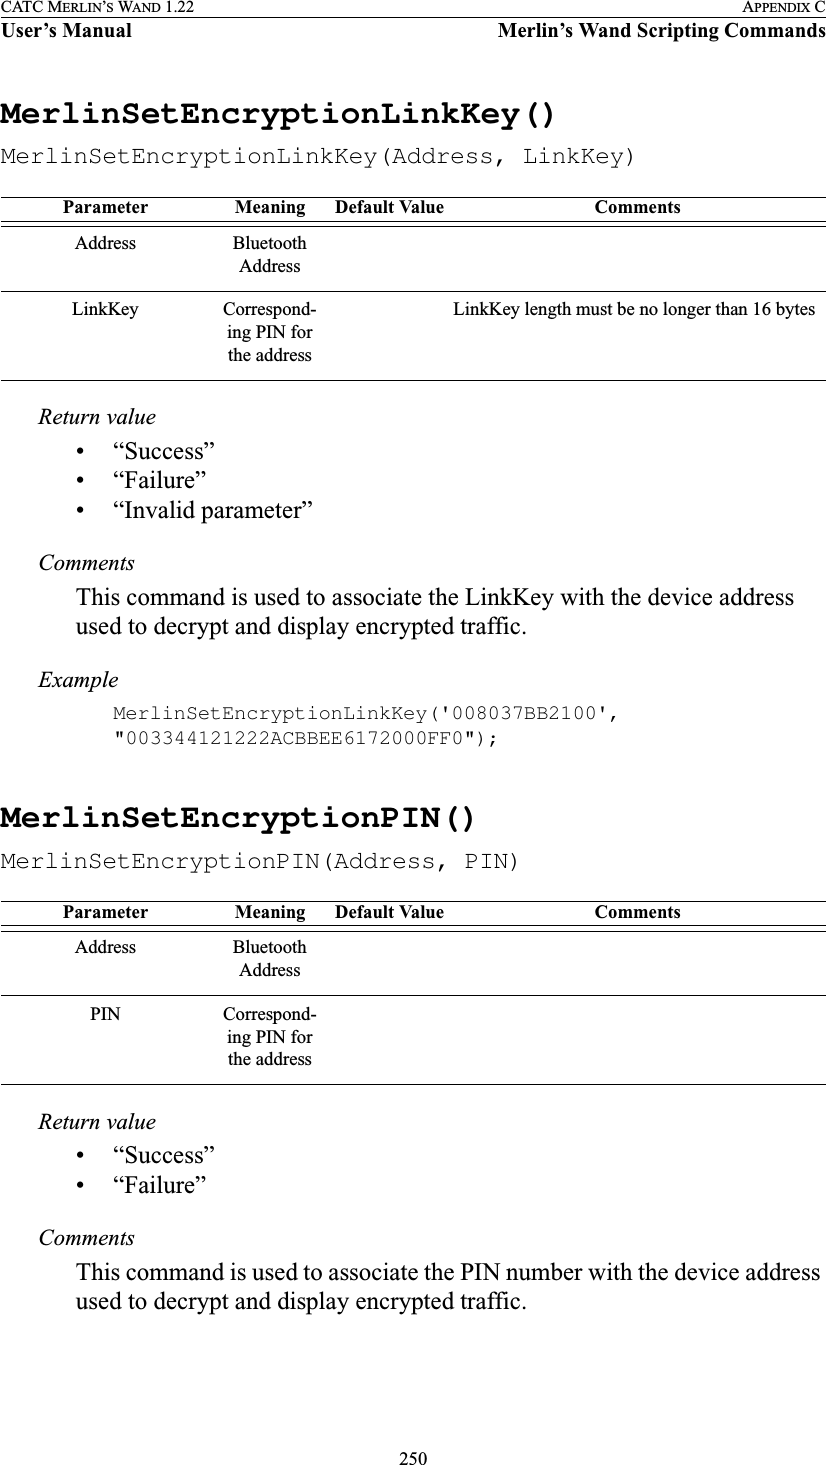 250CATC MERLIN’S WAND 1.22 APPENDIX CUser’s Manual Merlin’s Wand Scripting CommandsMerlinSetEncryptionLinkKey()MerlinSetEncryptionLinkKey(Address, LinkKey)Return value• “Success”• “Failure”• “Invalid parameter”CommentsThis command is used to associate the LinkKey with the device address used to decrypt and display encrypted traffic.ExampleMerlinSetEncryptionLinkKey(&apos;008037BB2100&apos;, &quot;003344121222ACBBEE6172000FF0&quot;);MerlinSetEncryptionPIN()MerlinSetEncryptionPIN(Address, PIN)Return value• “Success”• “Failure”CommentsThis command is used to associate the PIN number with the device address used to decrypt and display encrypted traffic.Parameter Meaning Default Value CommentsAddress Bluetooth AddressLinkKey Correspond-ing PIN for the addressLinkKey length must be no longer than 16 bytesParameter Meaning Default Value CommentsAddress Bluetooth AddressPIN Correspond-ing PIN for the address